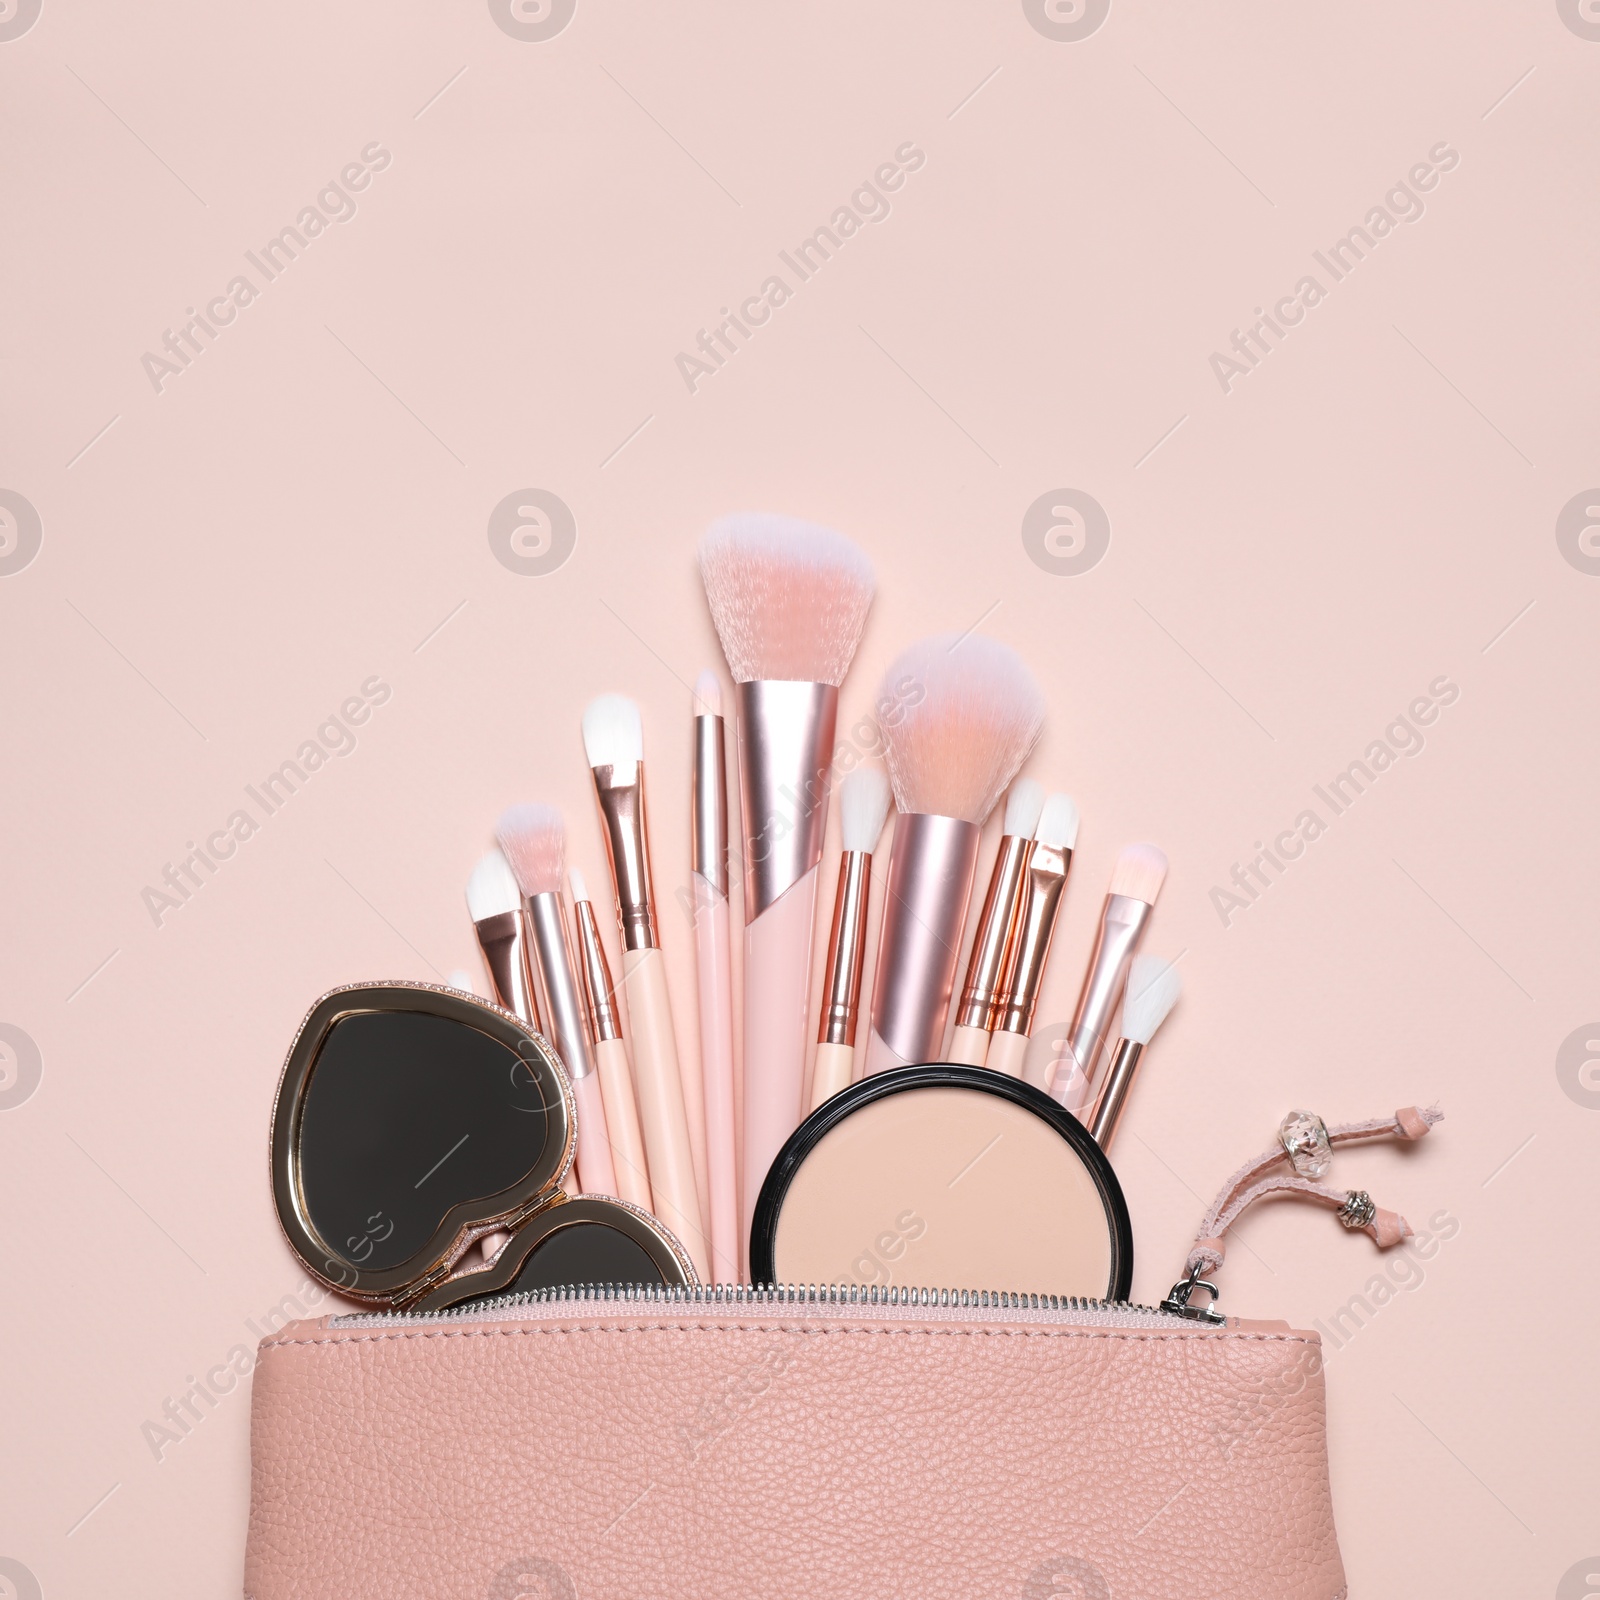 Photo of Makeup brushes, powder and mirror in cosmetic bag on pink background, flat lay